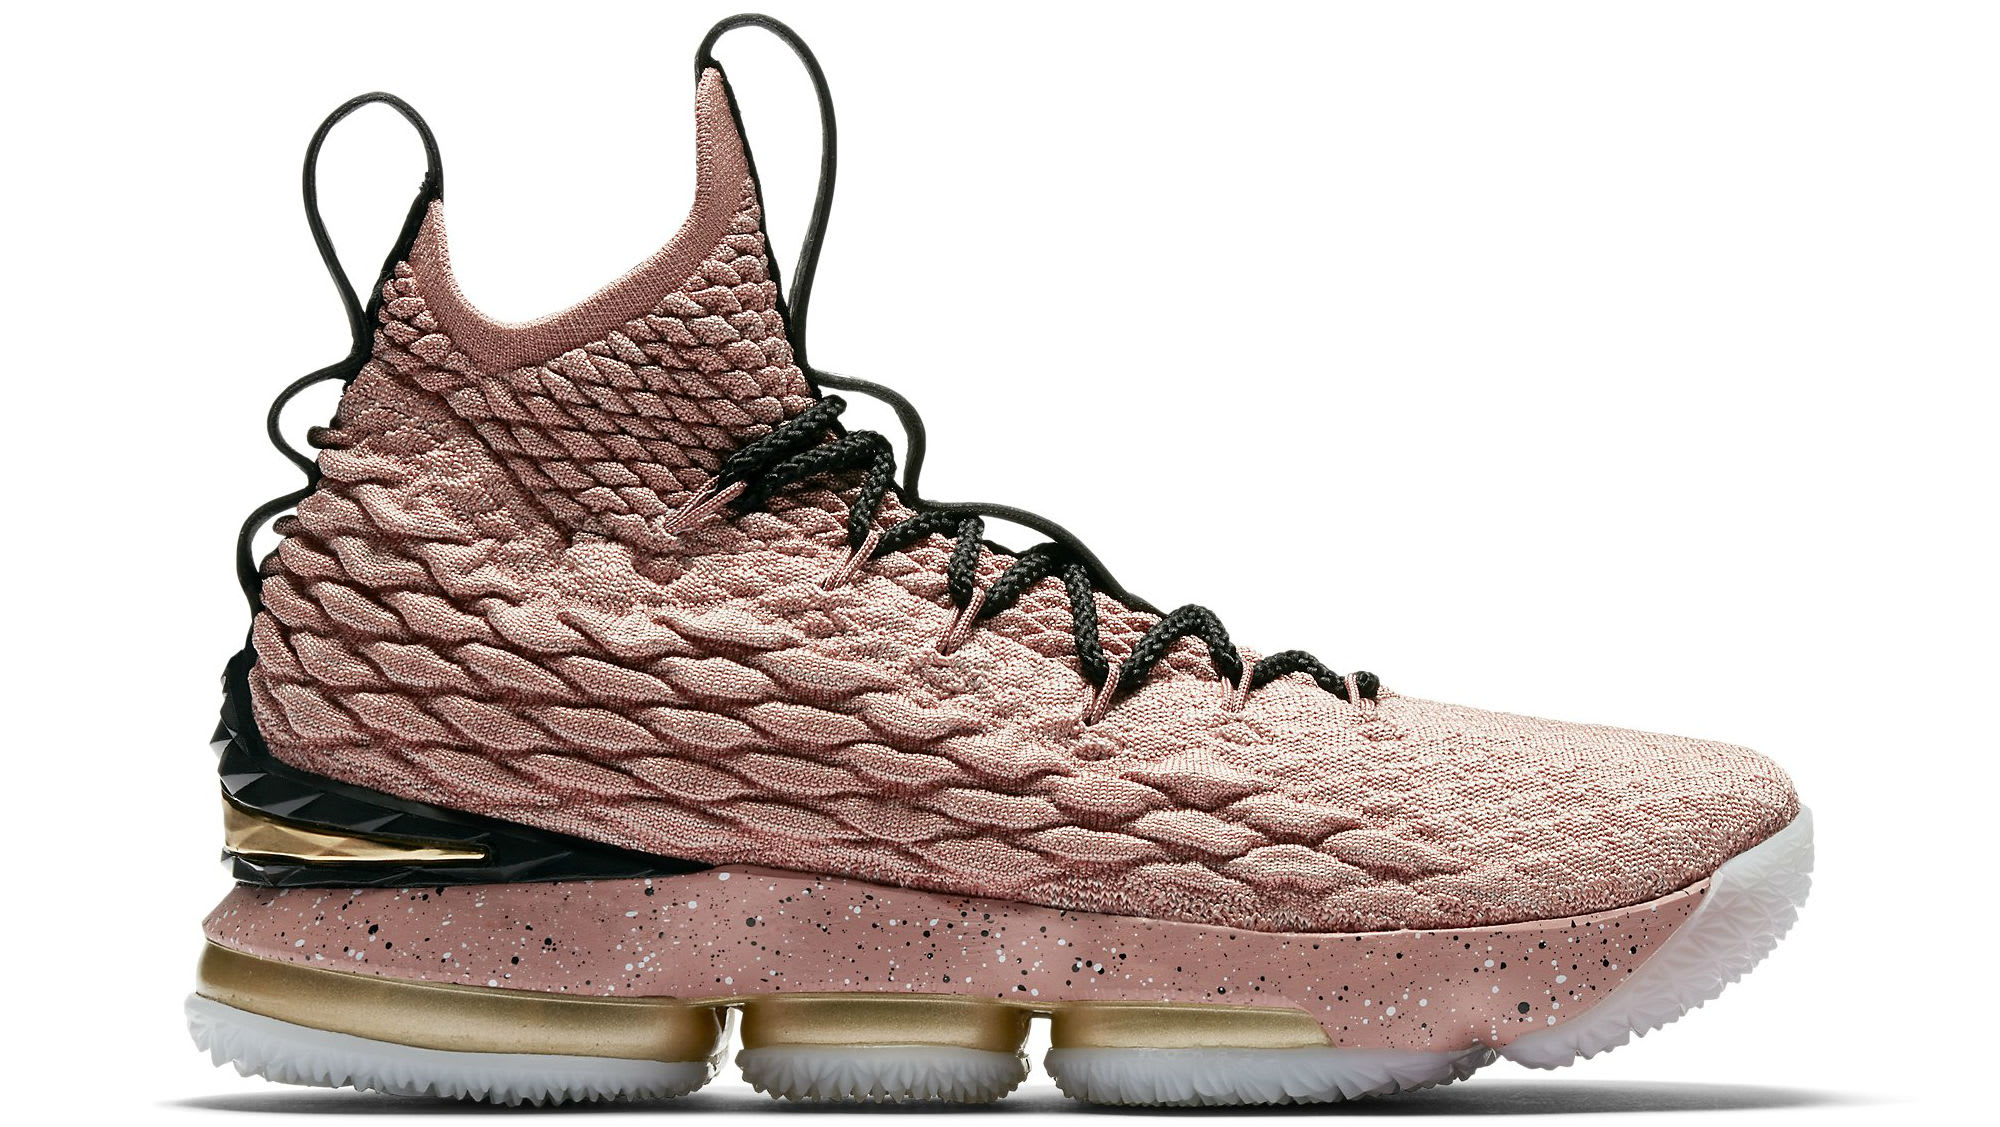 Nike LeBron 15 All-Star Pink Release Date 897650-600